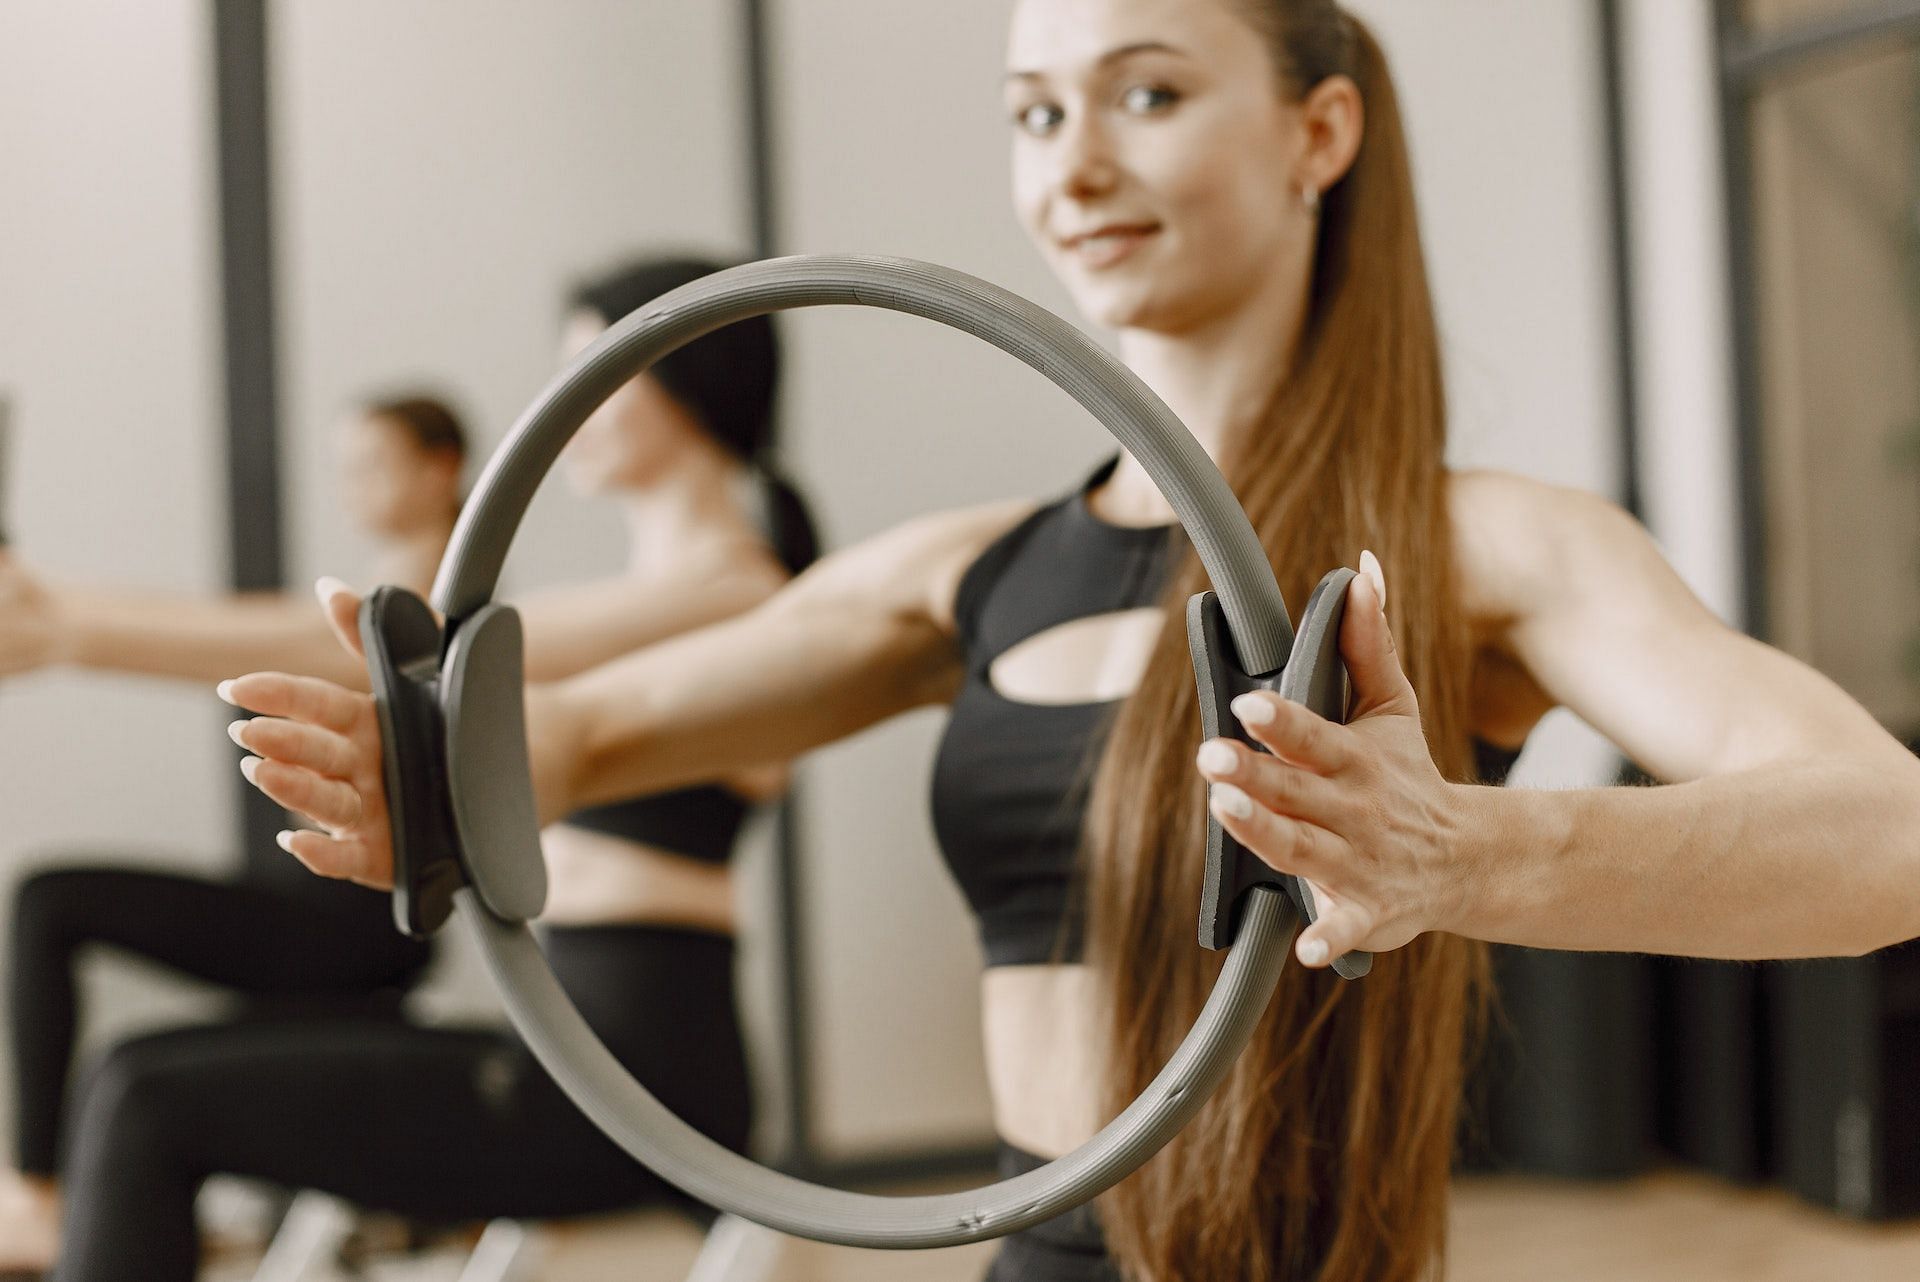 Pilates ring exercises add a variety to your Pilates session. (Photo via Pexels/Gustavo Fring)